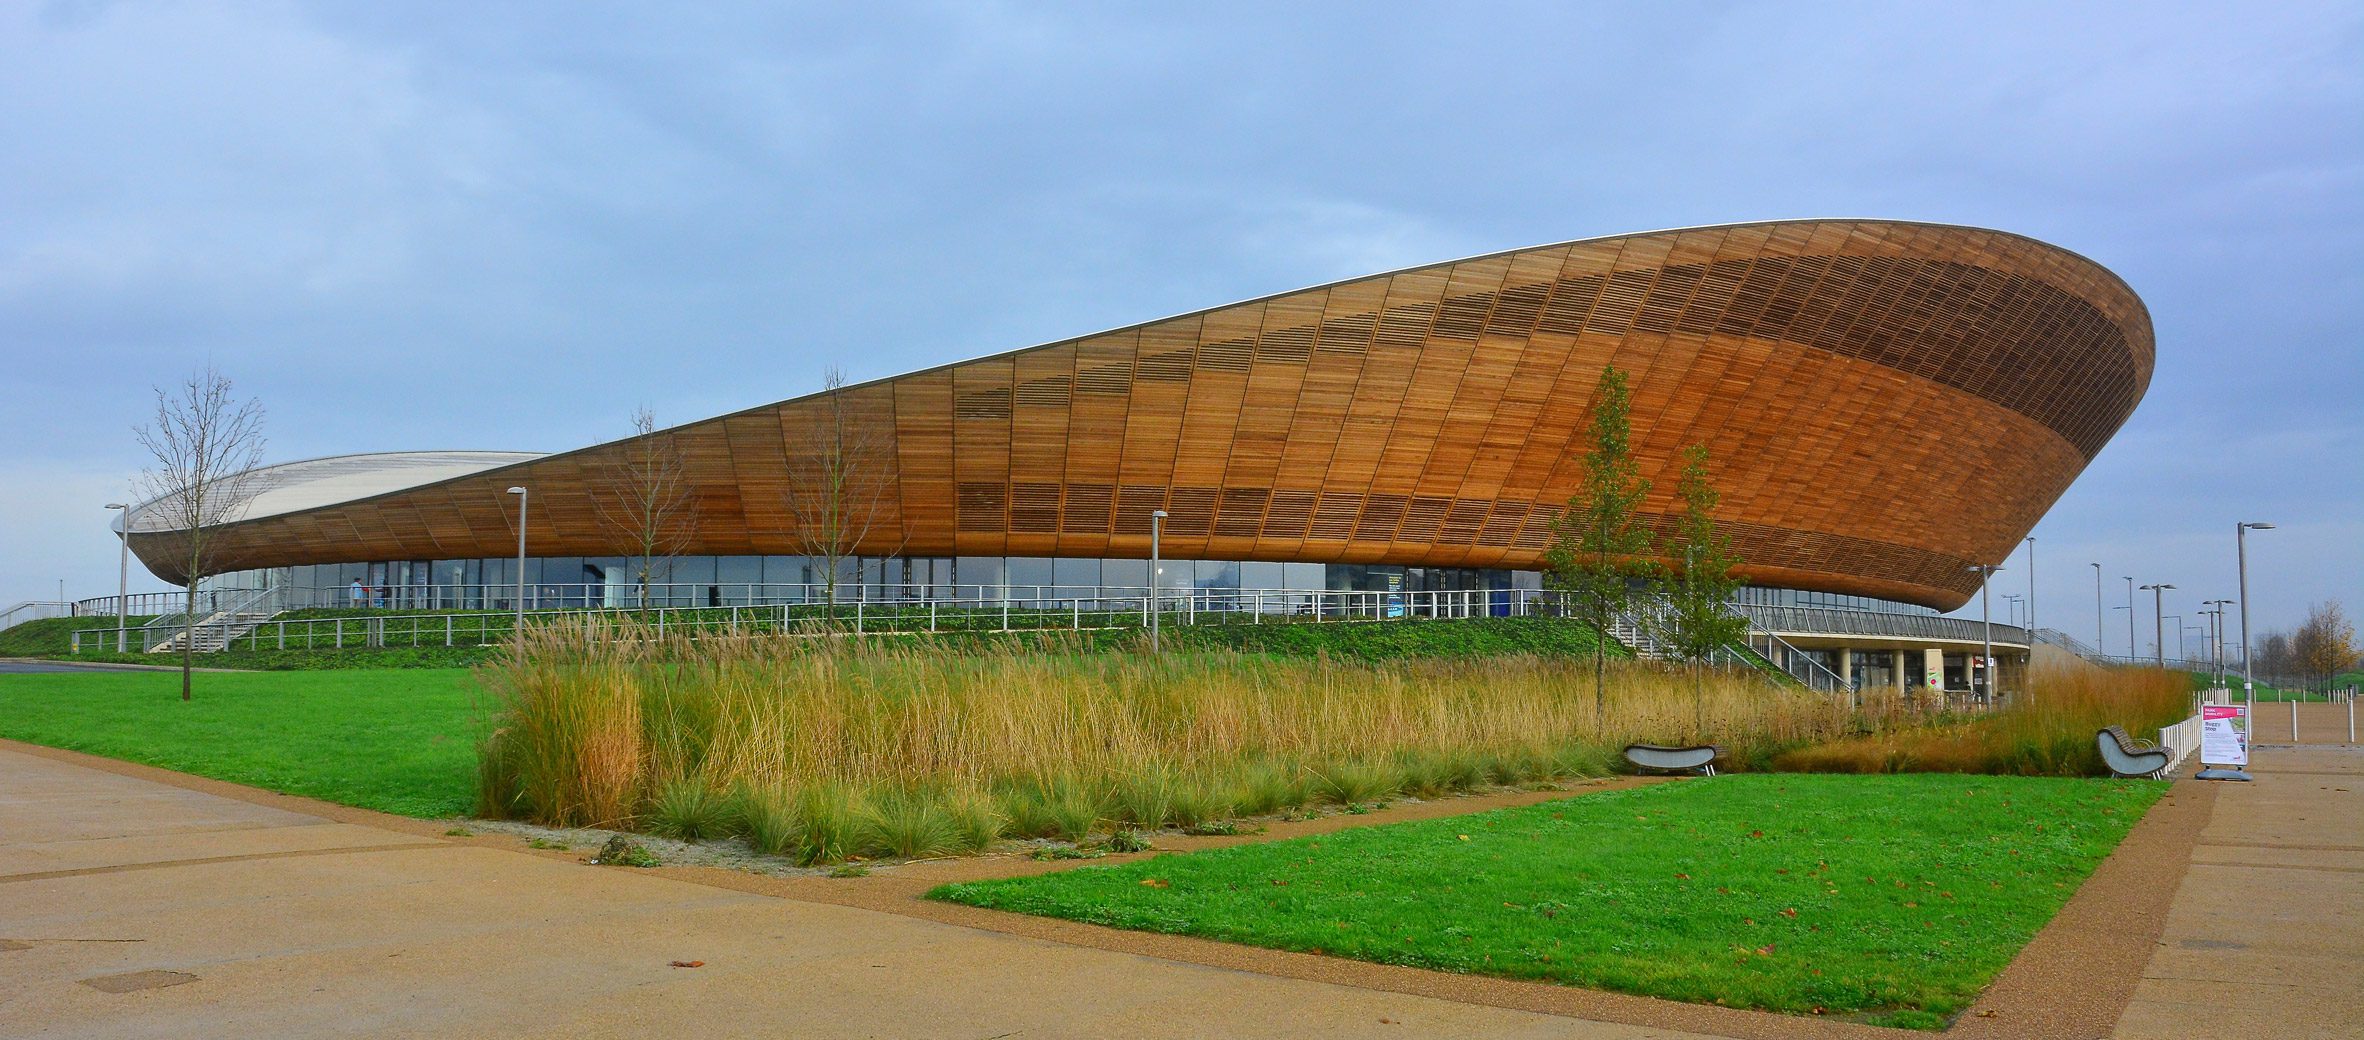 Olympic architecture: Velodrome, by Hopkins Architects, London 2012 Olympics